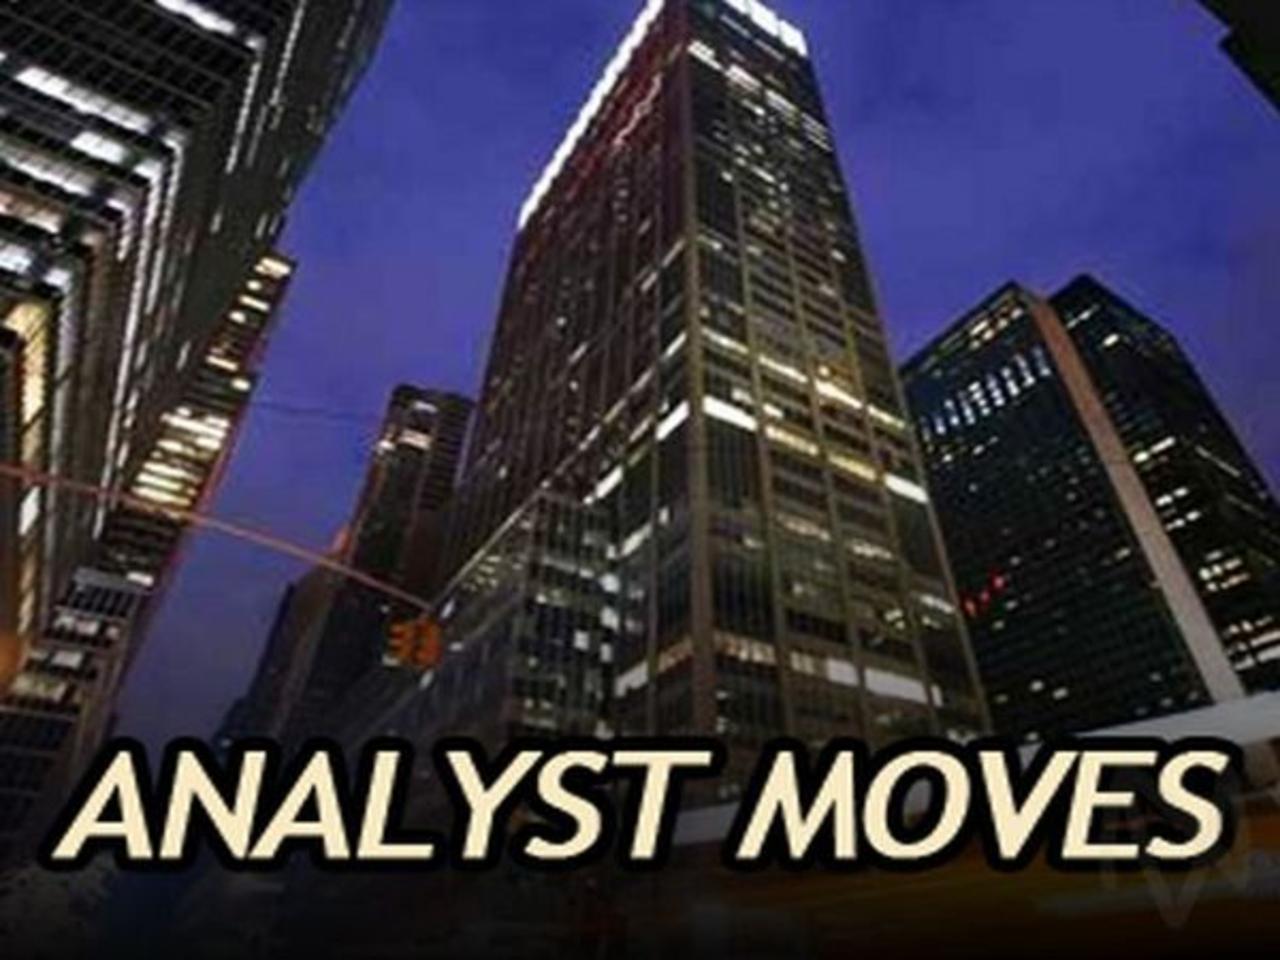 S&P 500 Analyst Moves: BBWI